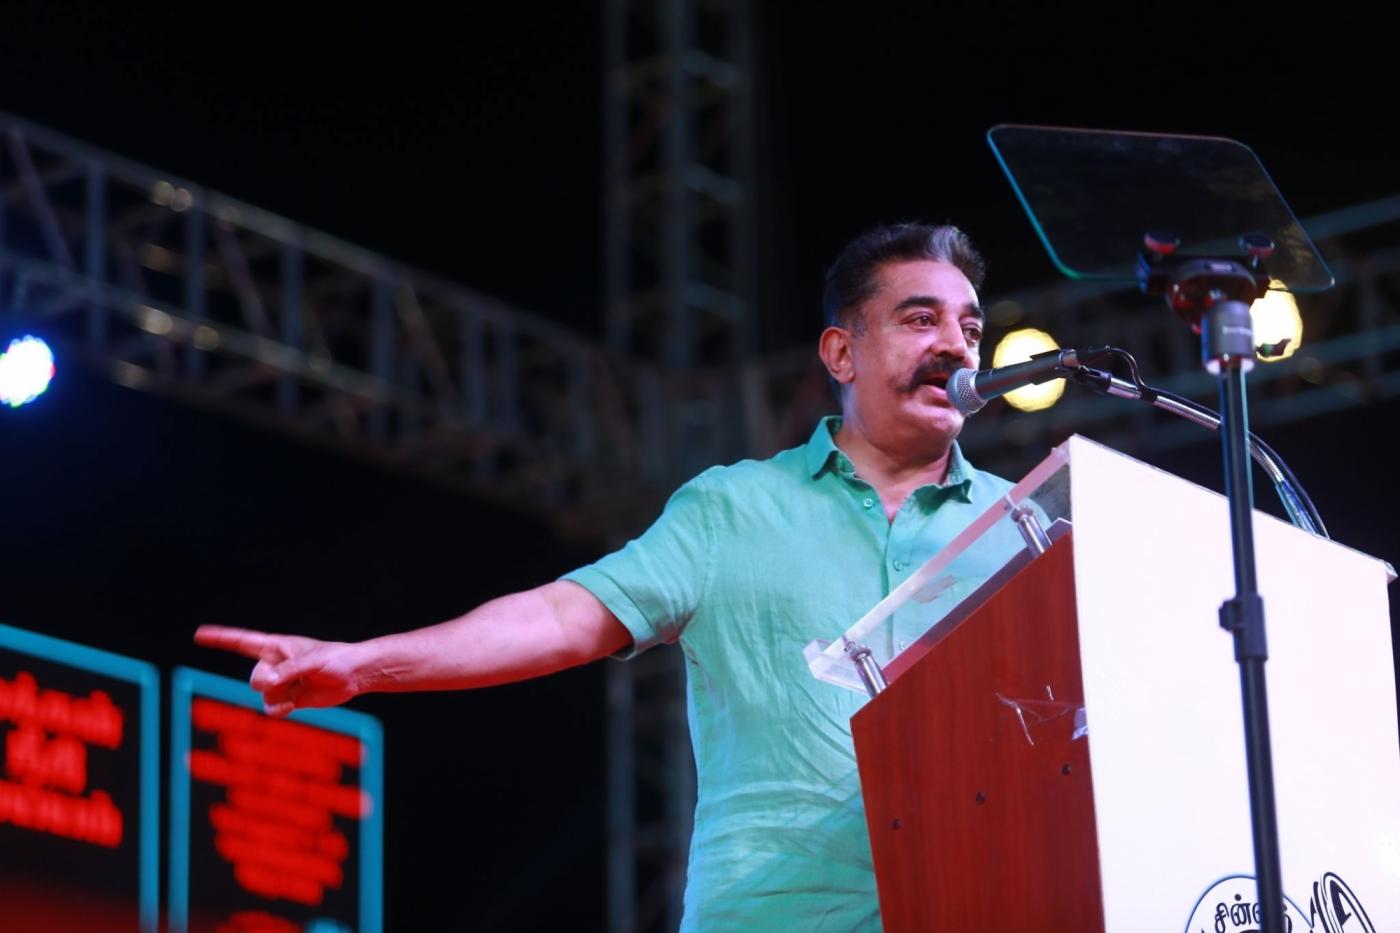 Puducherry: Makkal Needhi Maiam (MNM) President Kamal Haasan addresses during a party rally in Puducherry, on March 31, 2019. (Photo: IANS) by .